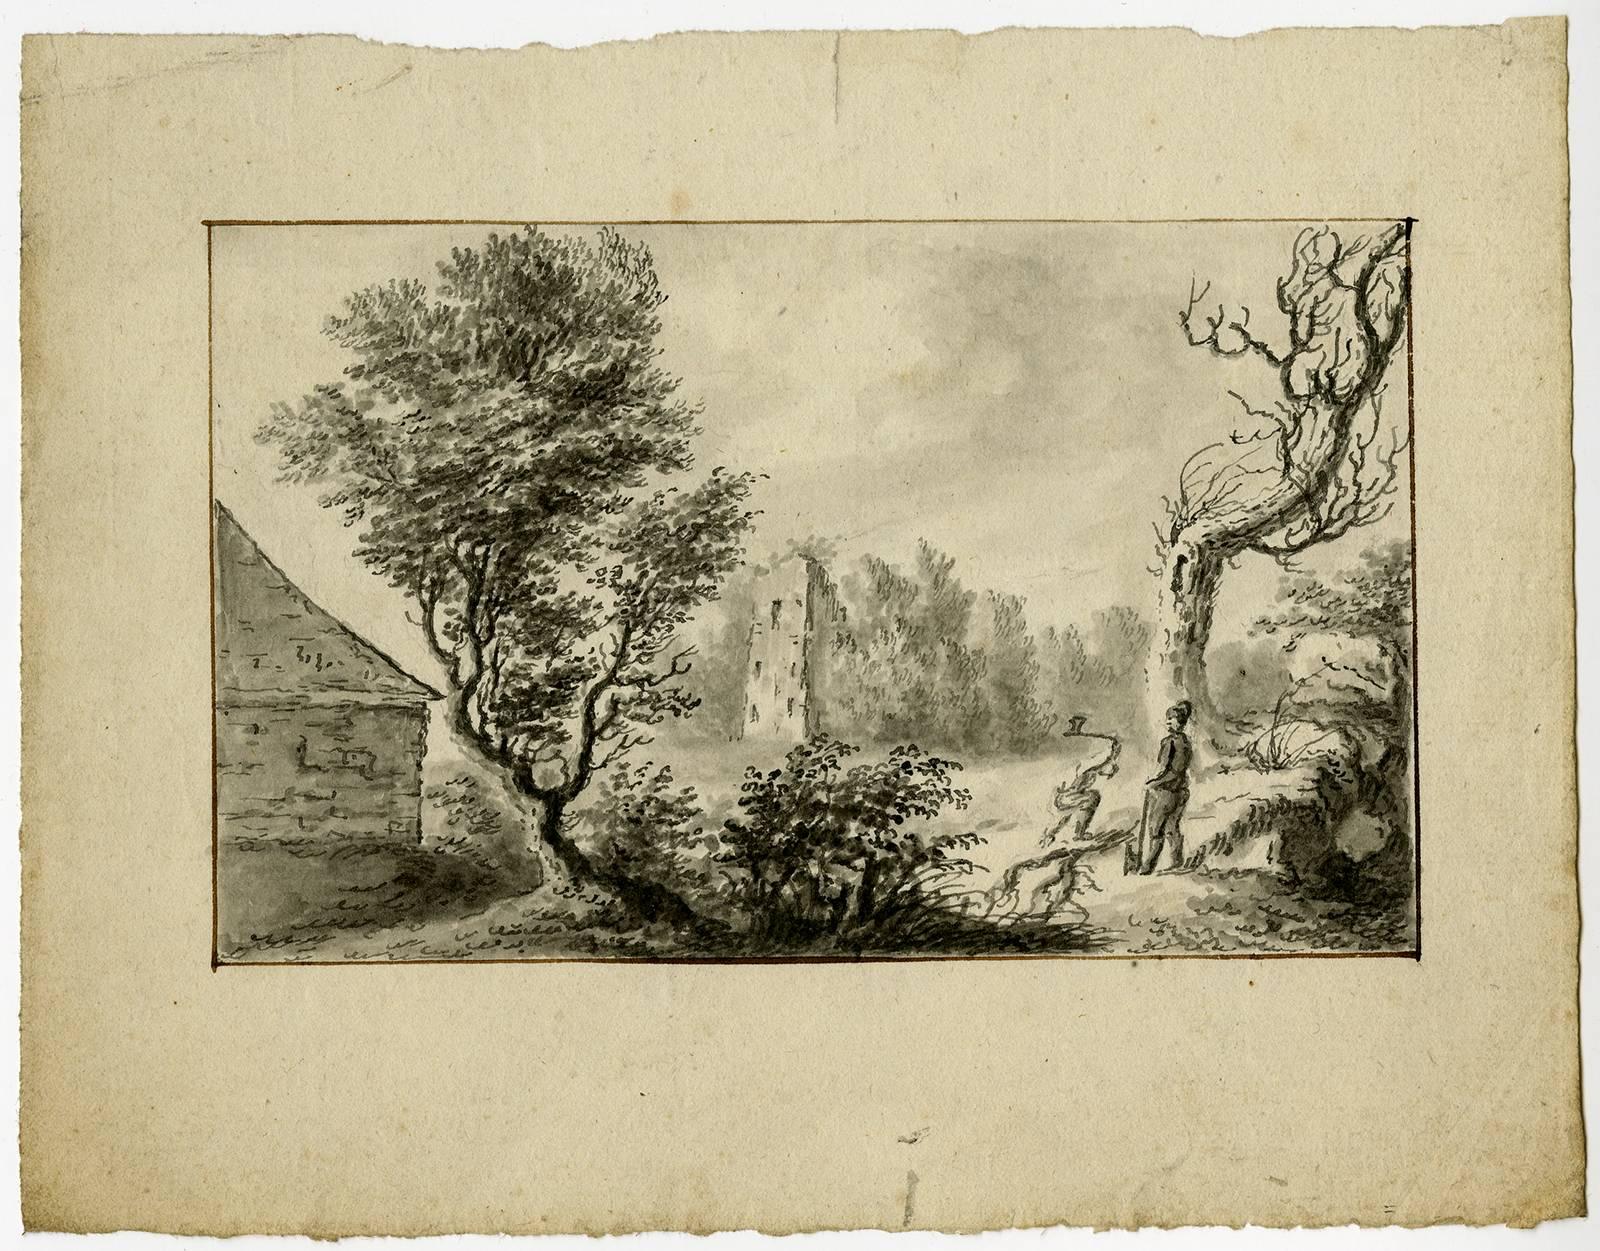 Unknown Landscape Art - Untitled - This drawing shows two loggers near a barn, ruin and trees.